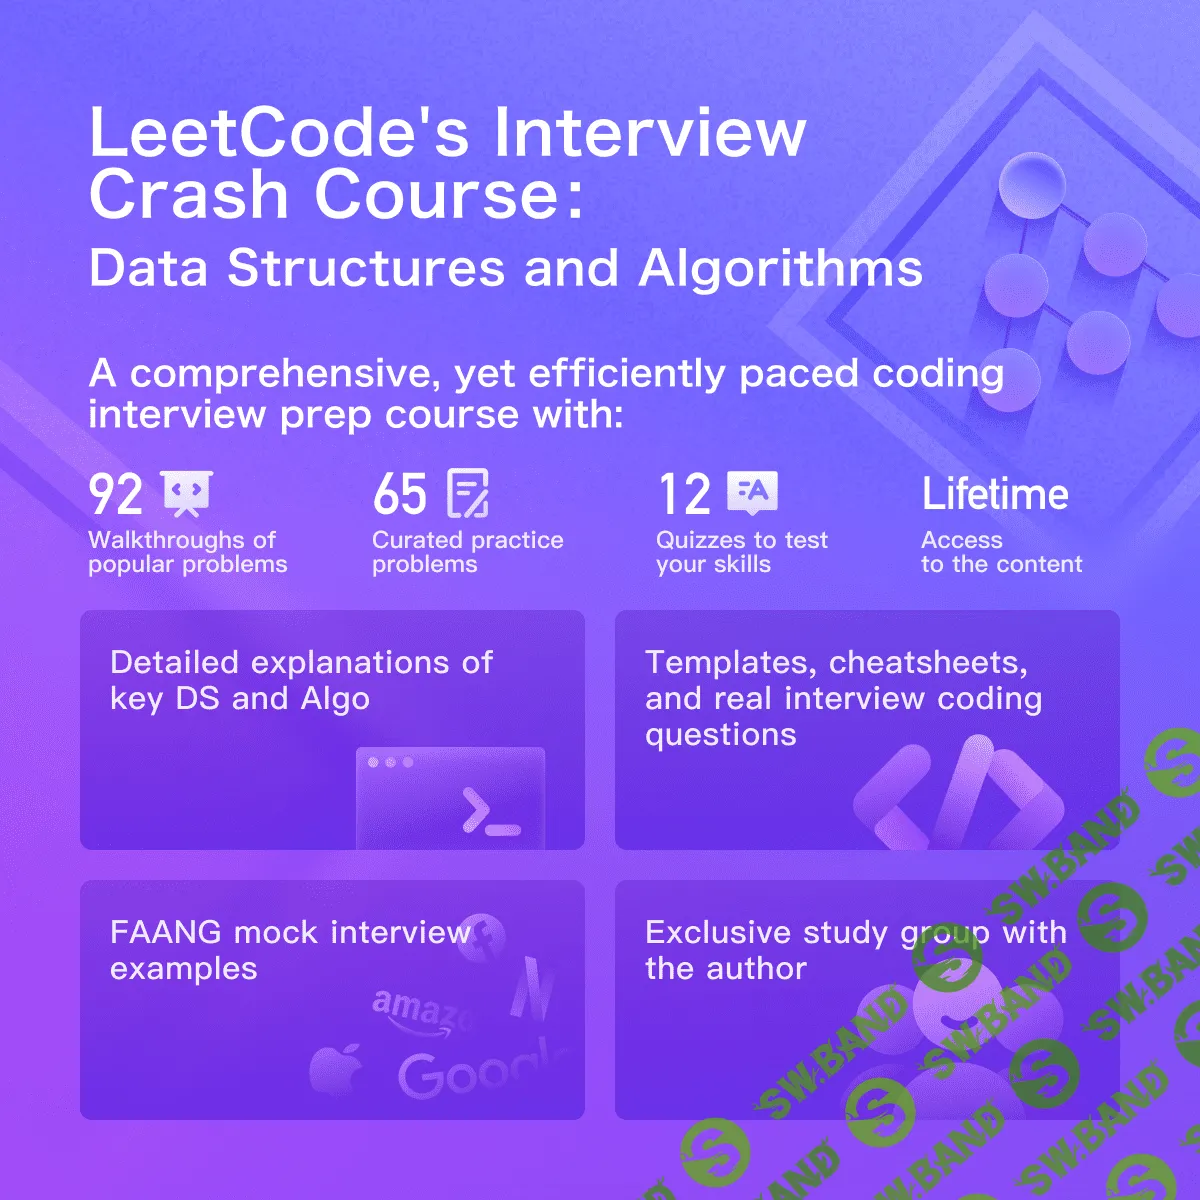 [LeetCode] Data Structures and Algorithms (2022)